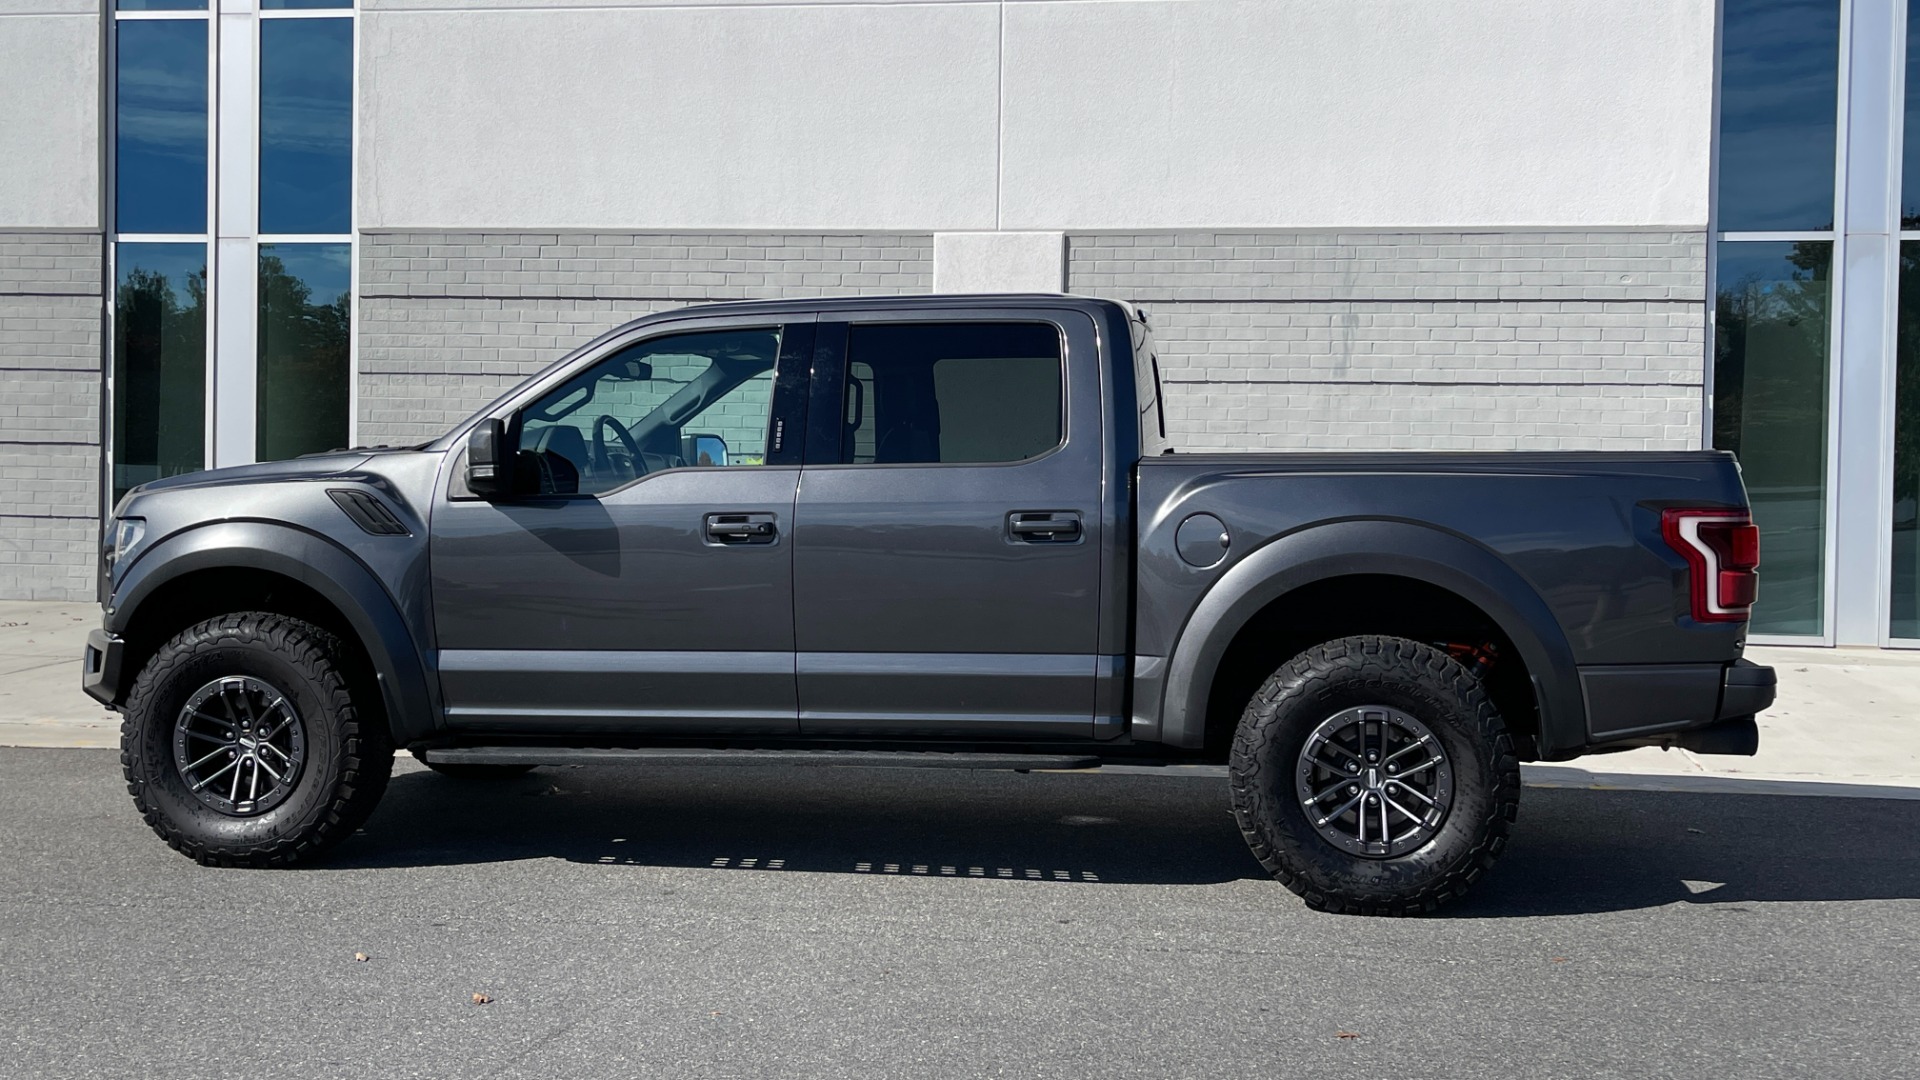 Used 2019 Ford F-150 RAPTOR / 802A PACKAGE / LIGHT PODS / CARBON FIBER / PANORAMIC ROOF for sale Sold at Formula Imports in Charlotte NC 28227 3